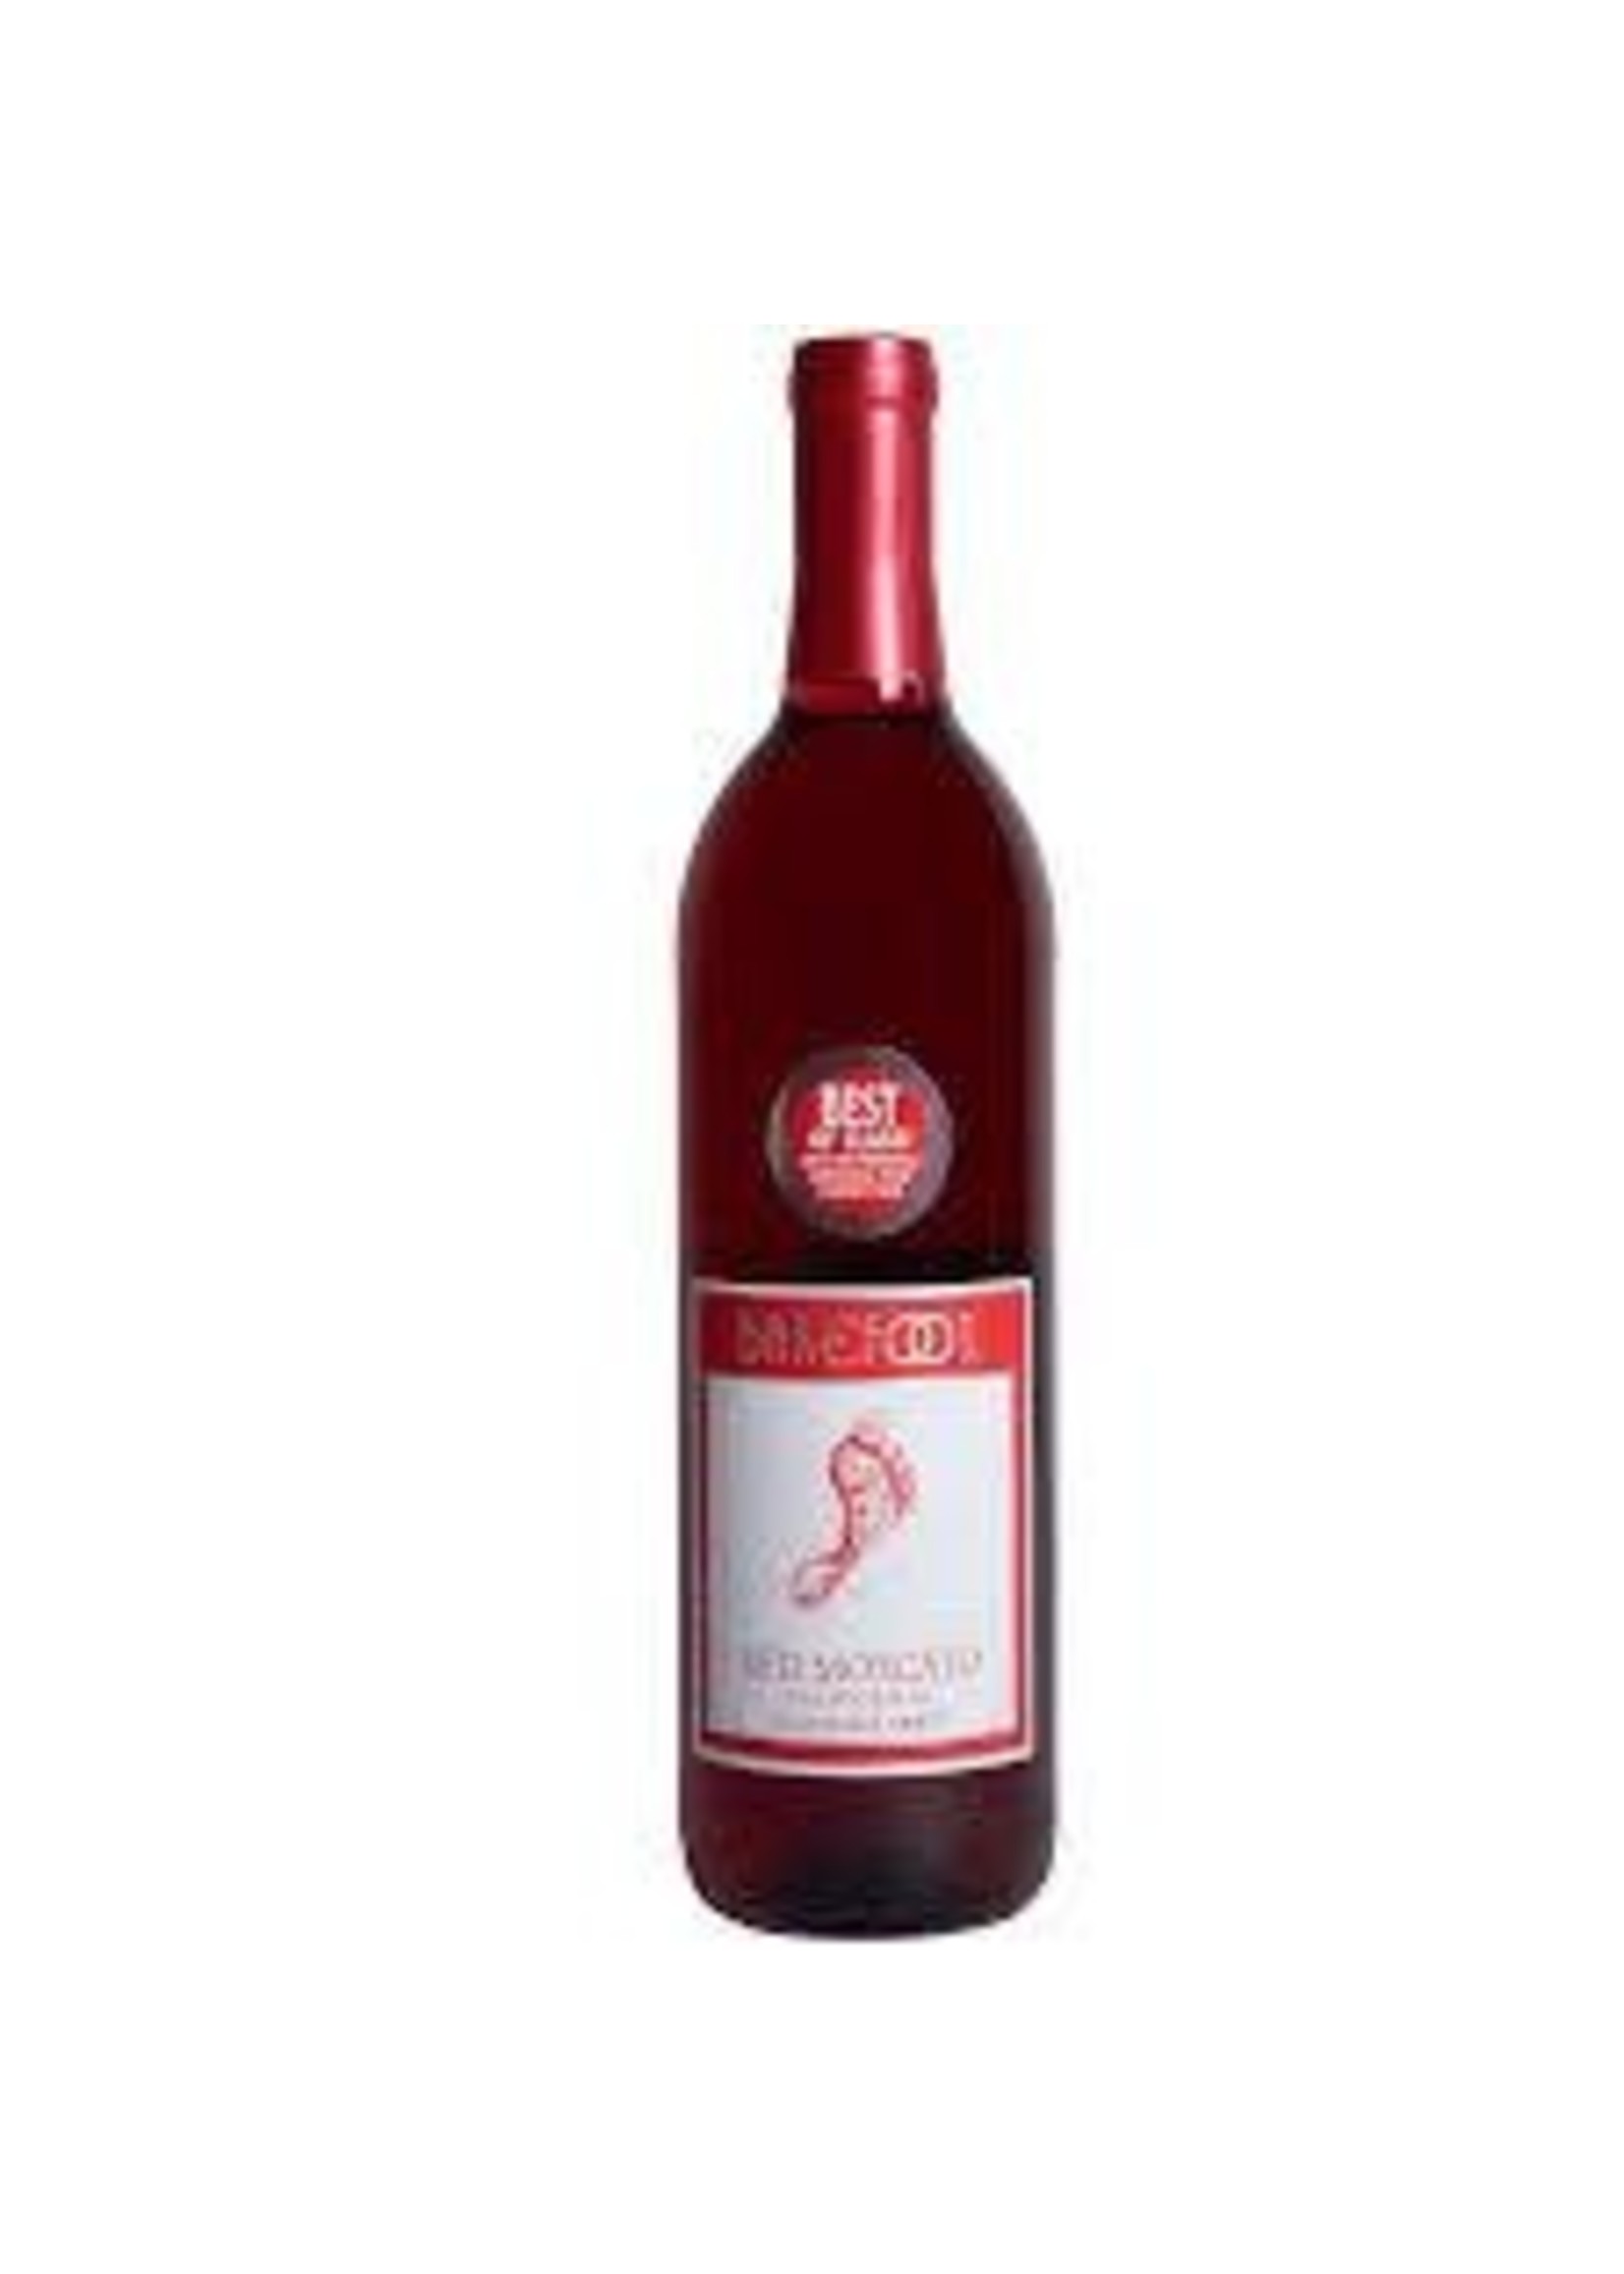 Barefoot Barefoot / Red Moscato